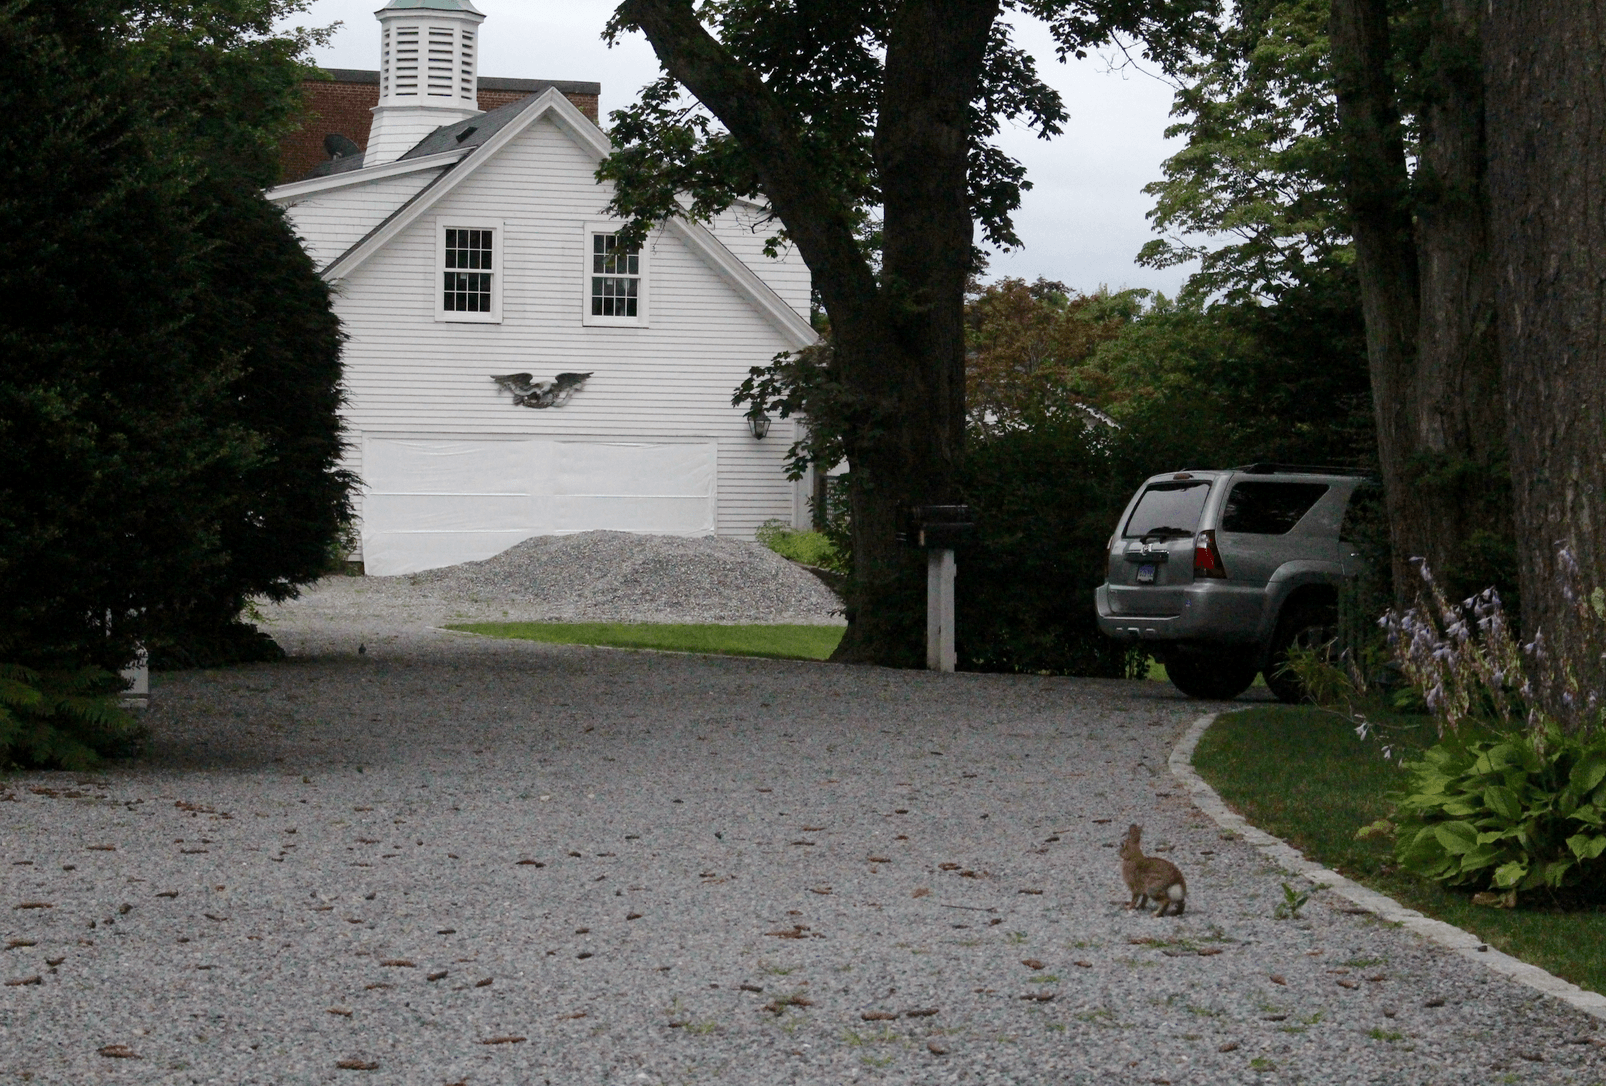 Driveway with view of carriage house at 45 Patterson Ave.